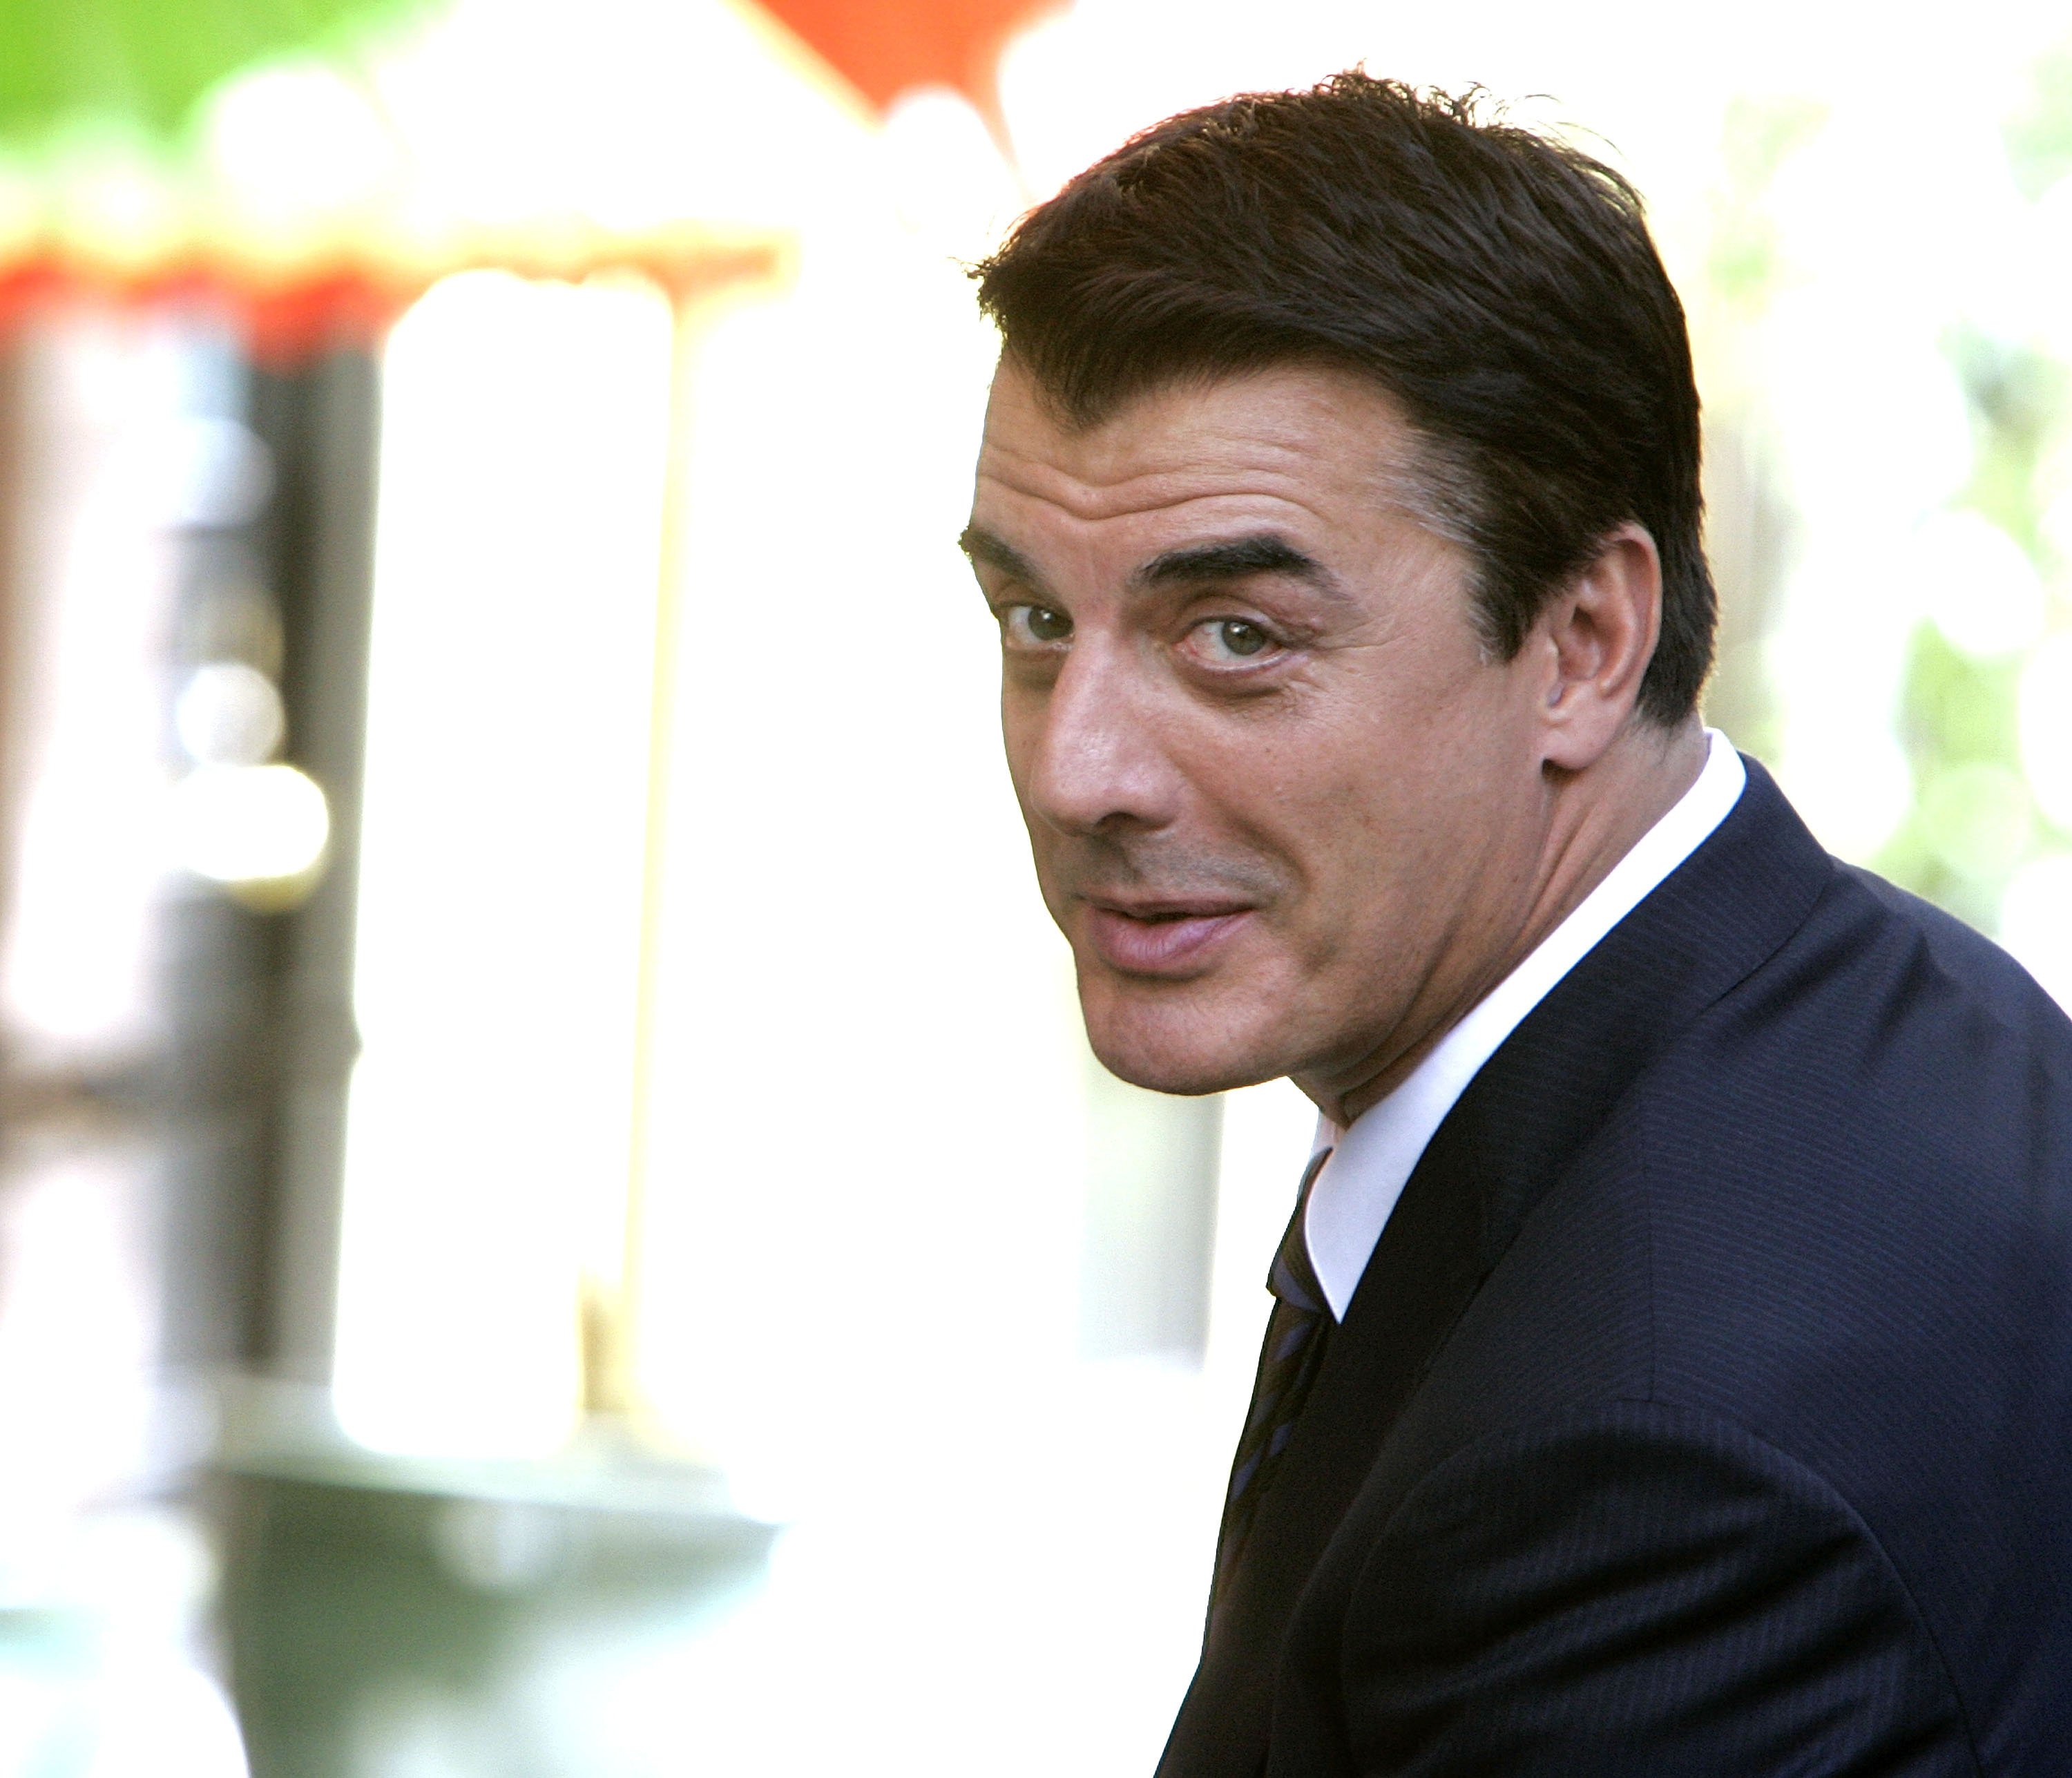 Chris Noth as Mr. Big in 'Sex and the City: The Movie'